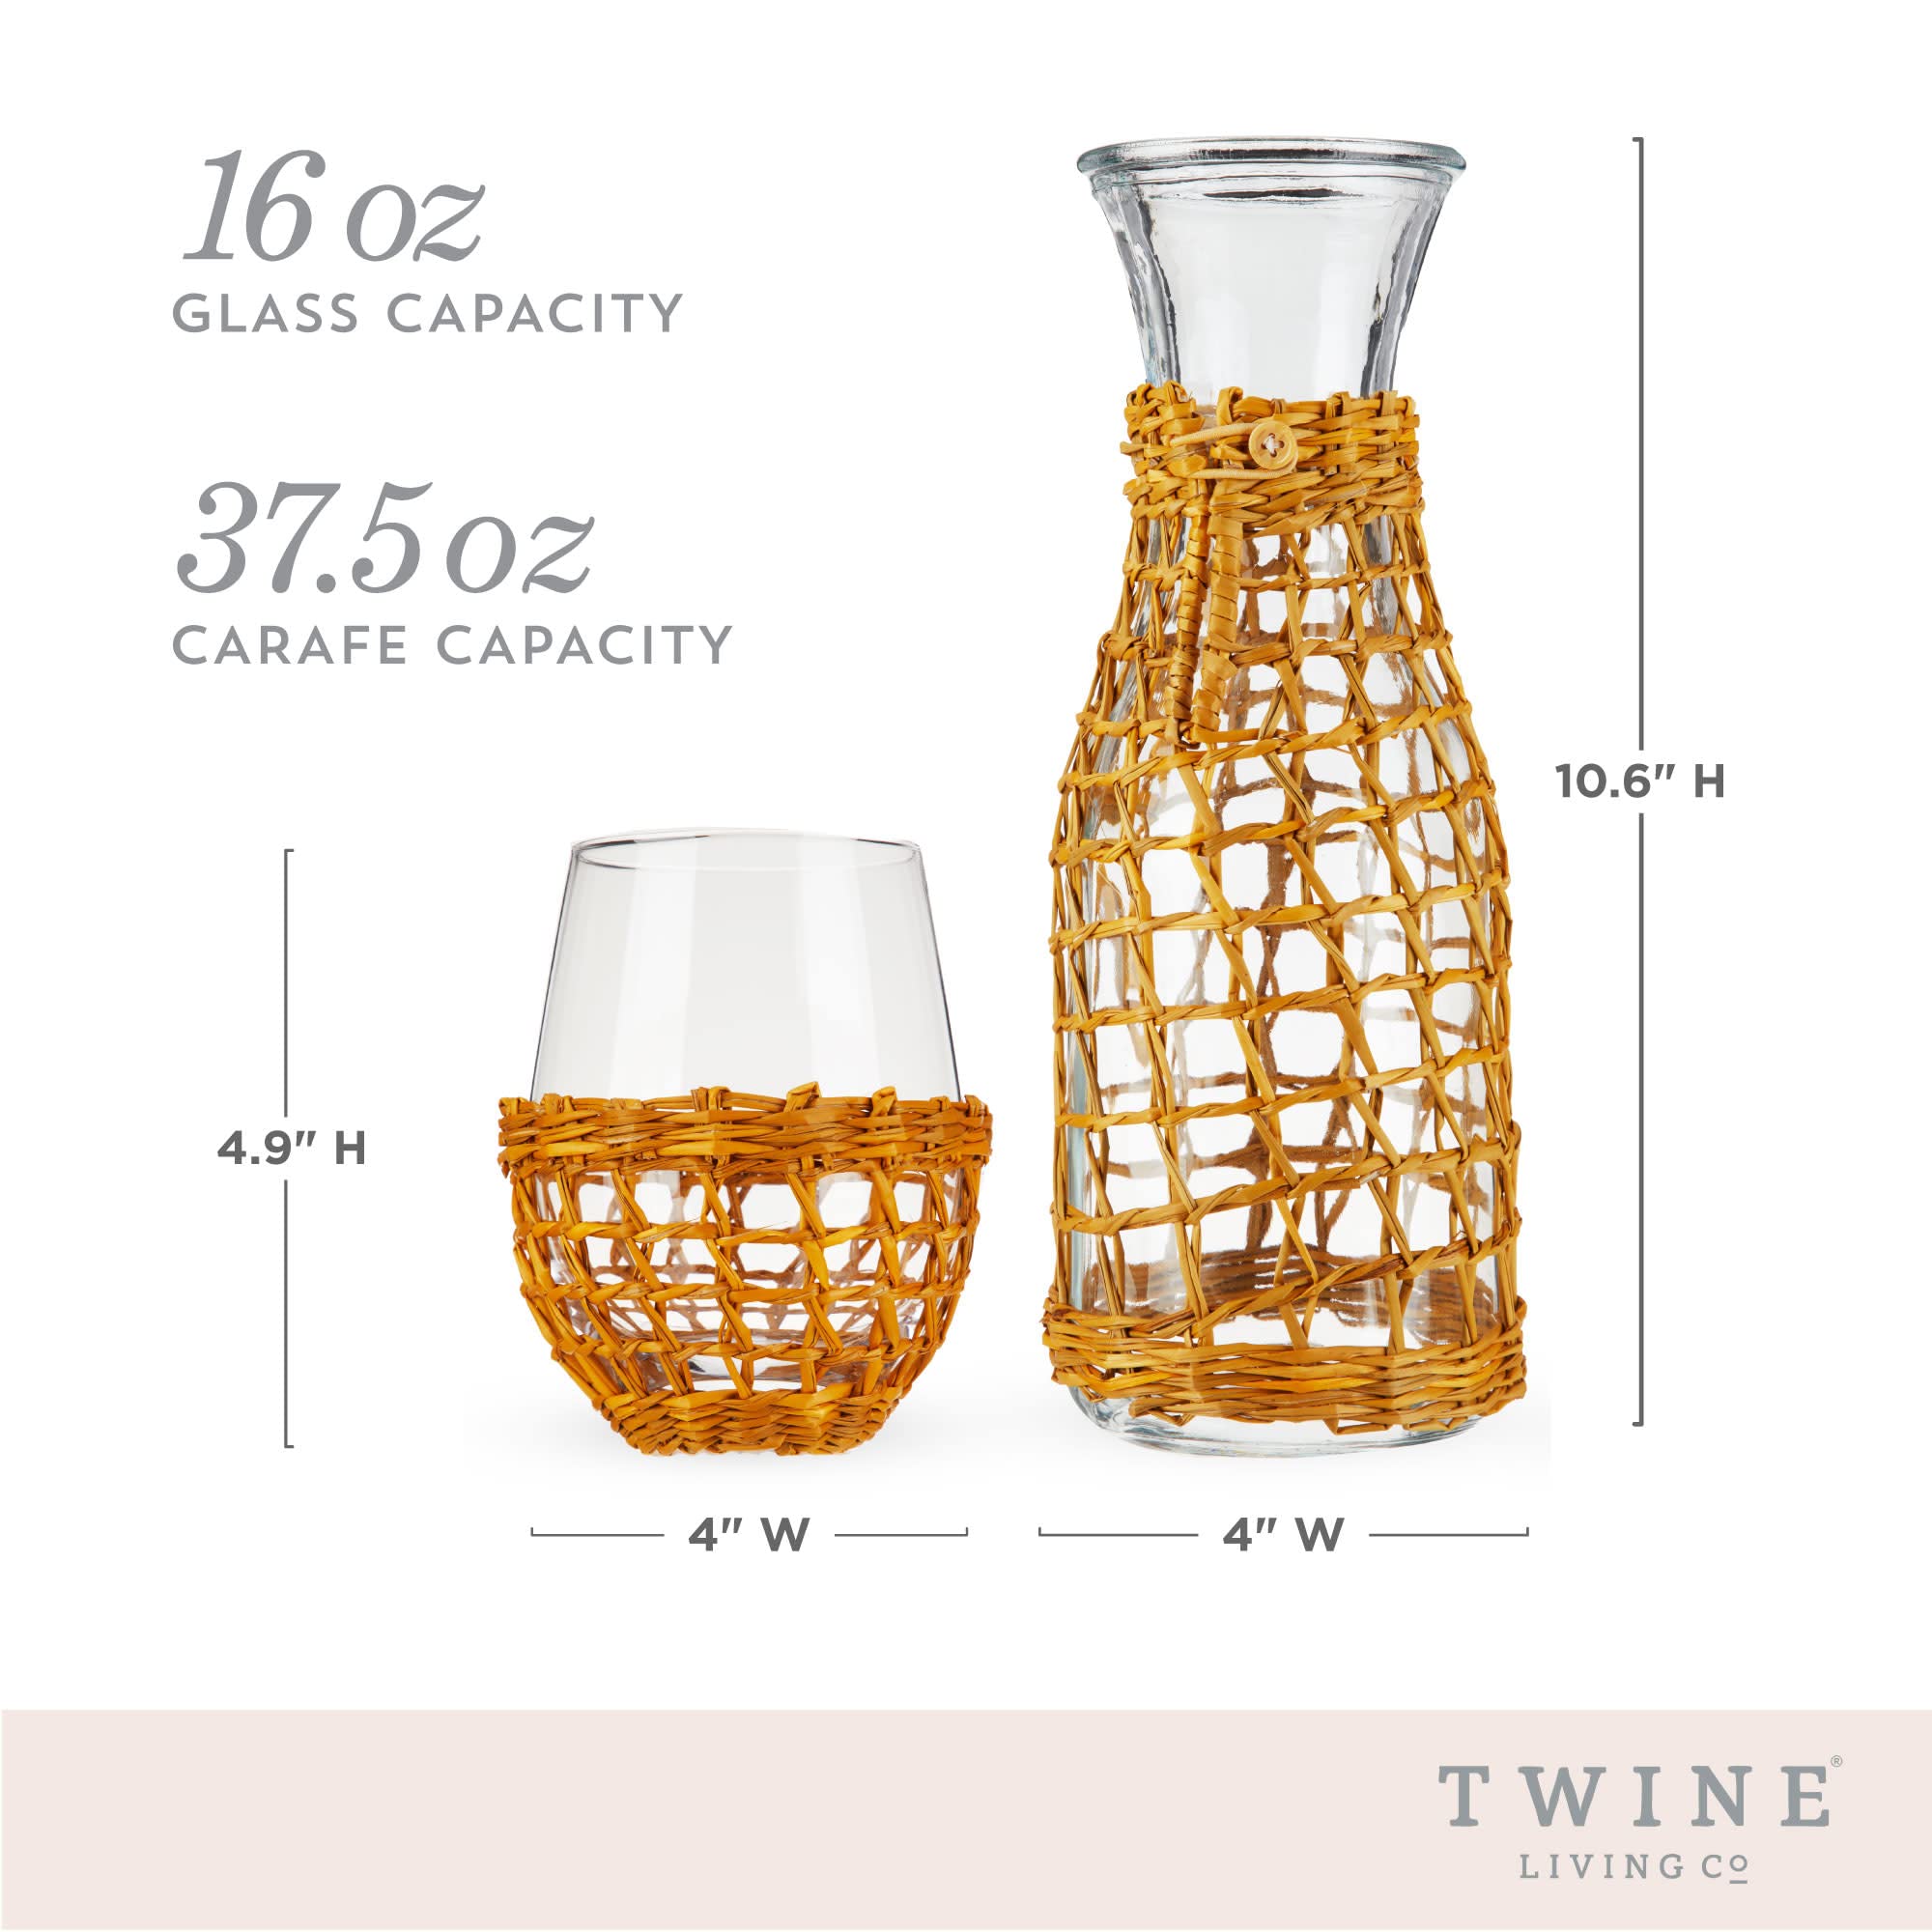 Twine Island Wine Glasses with Carafe, Stemless Glassware with Seagrass Wrap for Night Stand, Dishwasher Safe, 16 Oz, 37.5 Oz, Set of 3, Set of 1, Beige